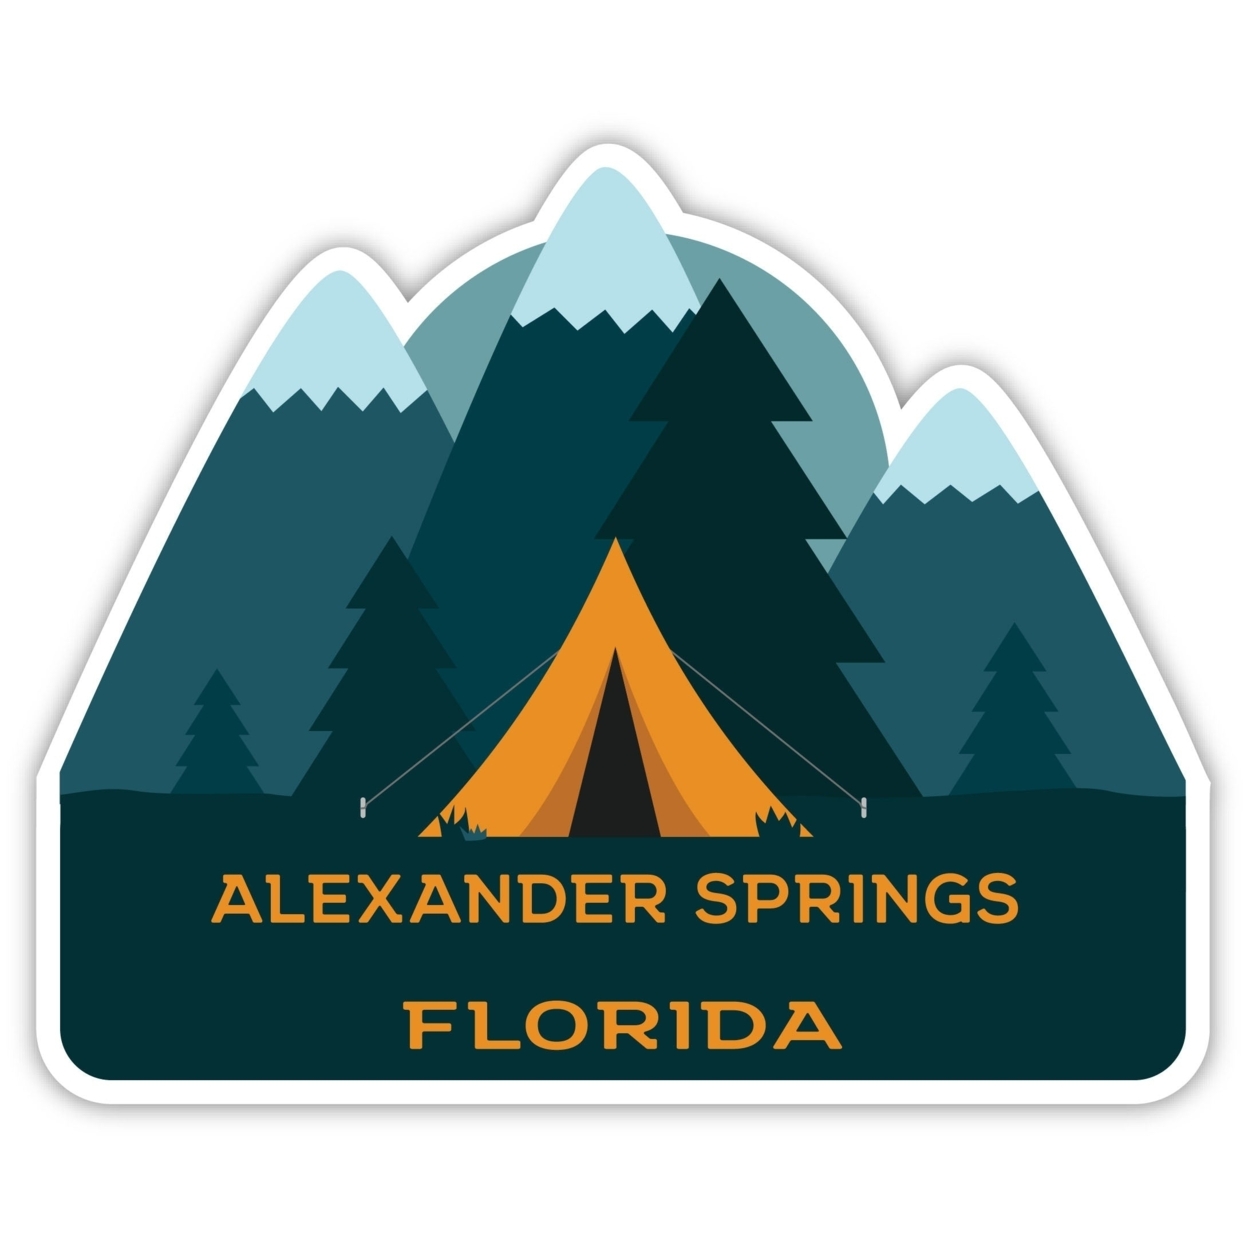 Alexander Springs Florida Souvenir Decorative Stickers (Choose Theme And Size) - 4-Pack, 2-Inch, Tent